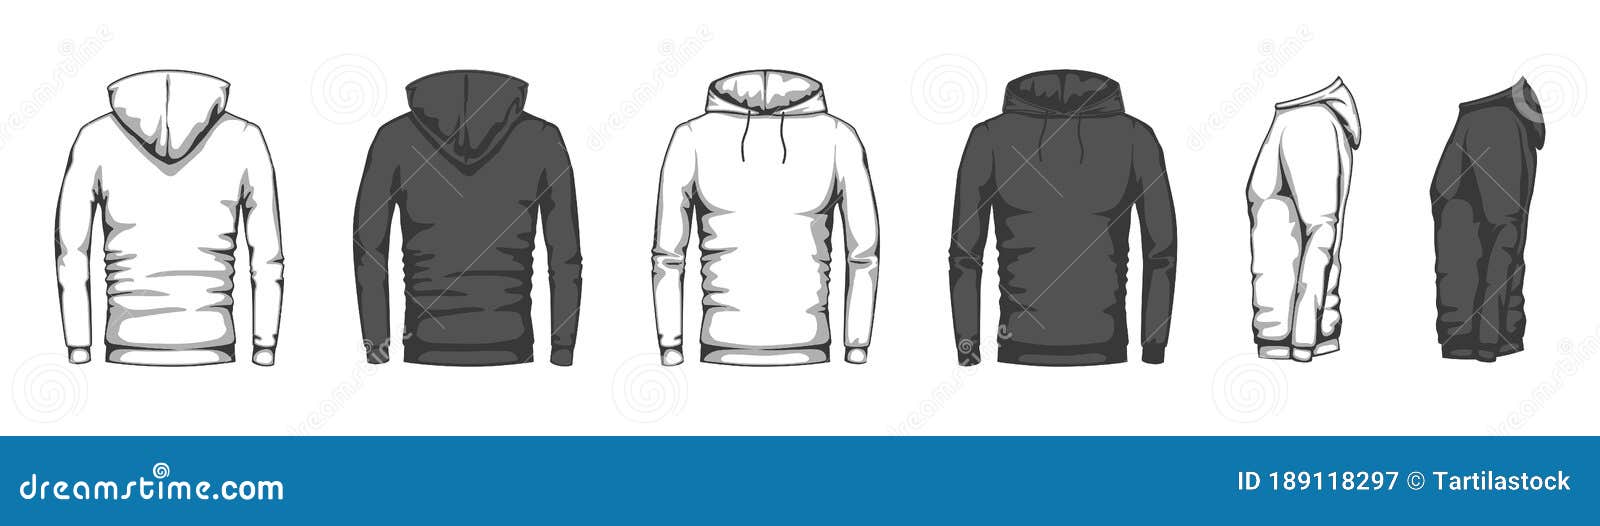 Download Hoodie Mockup. Trendy Casual Clothes Unisex Sport ...